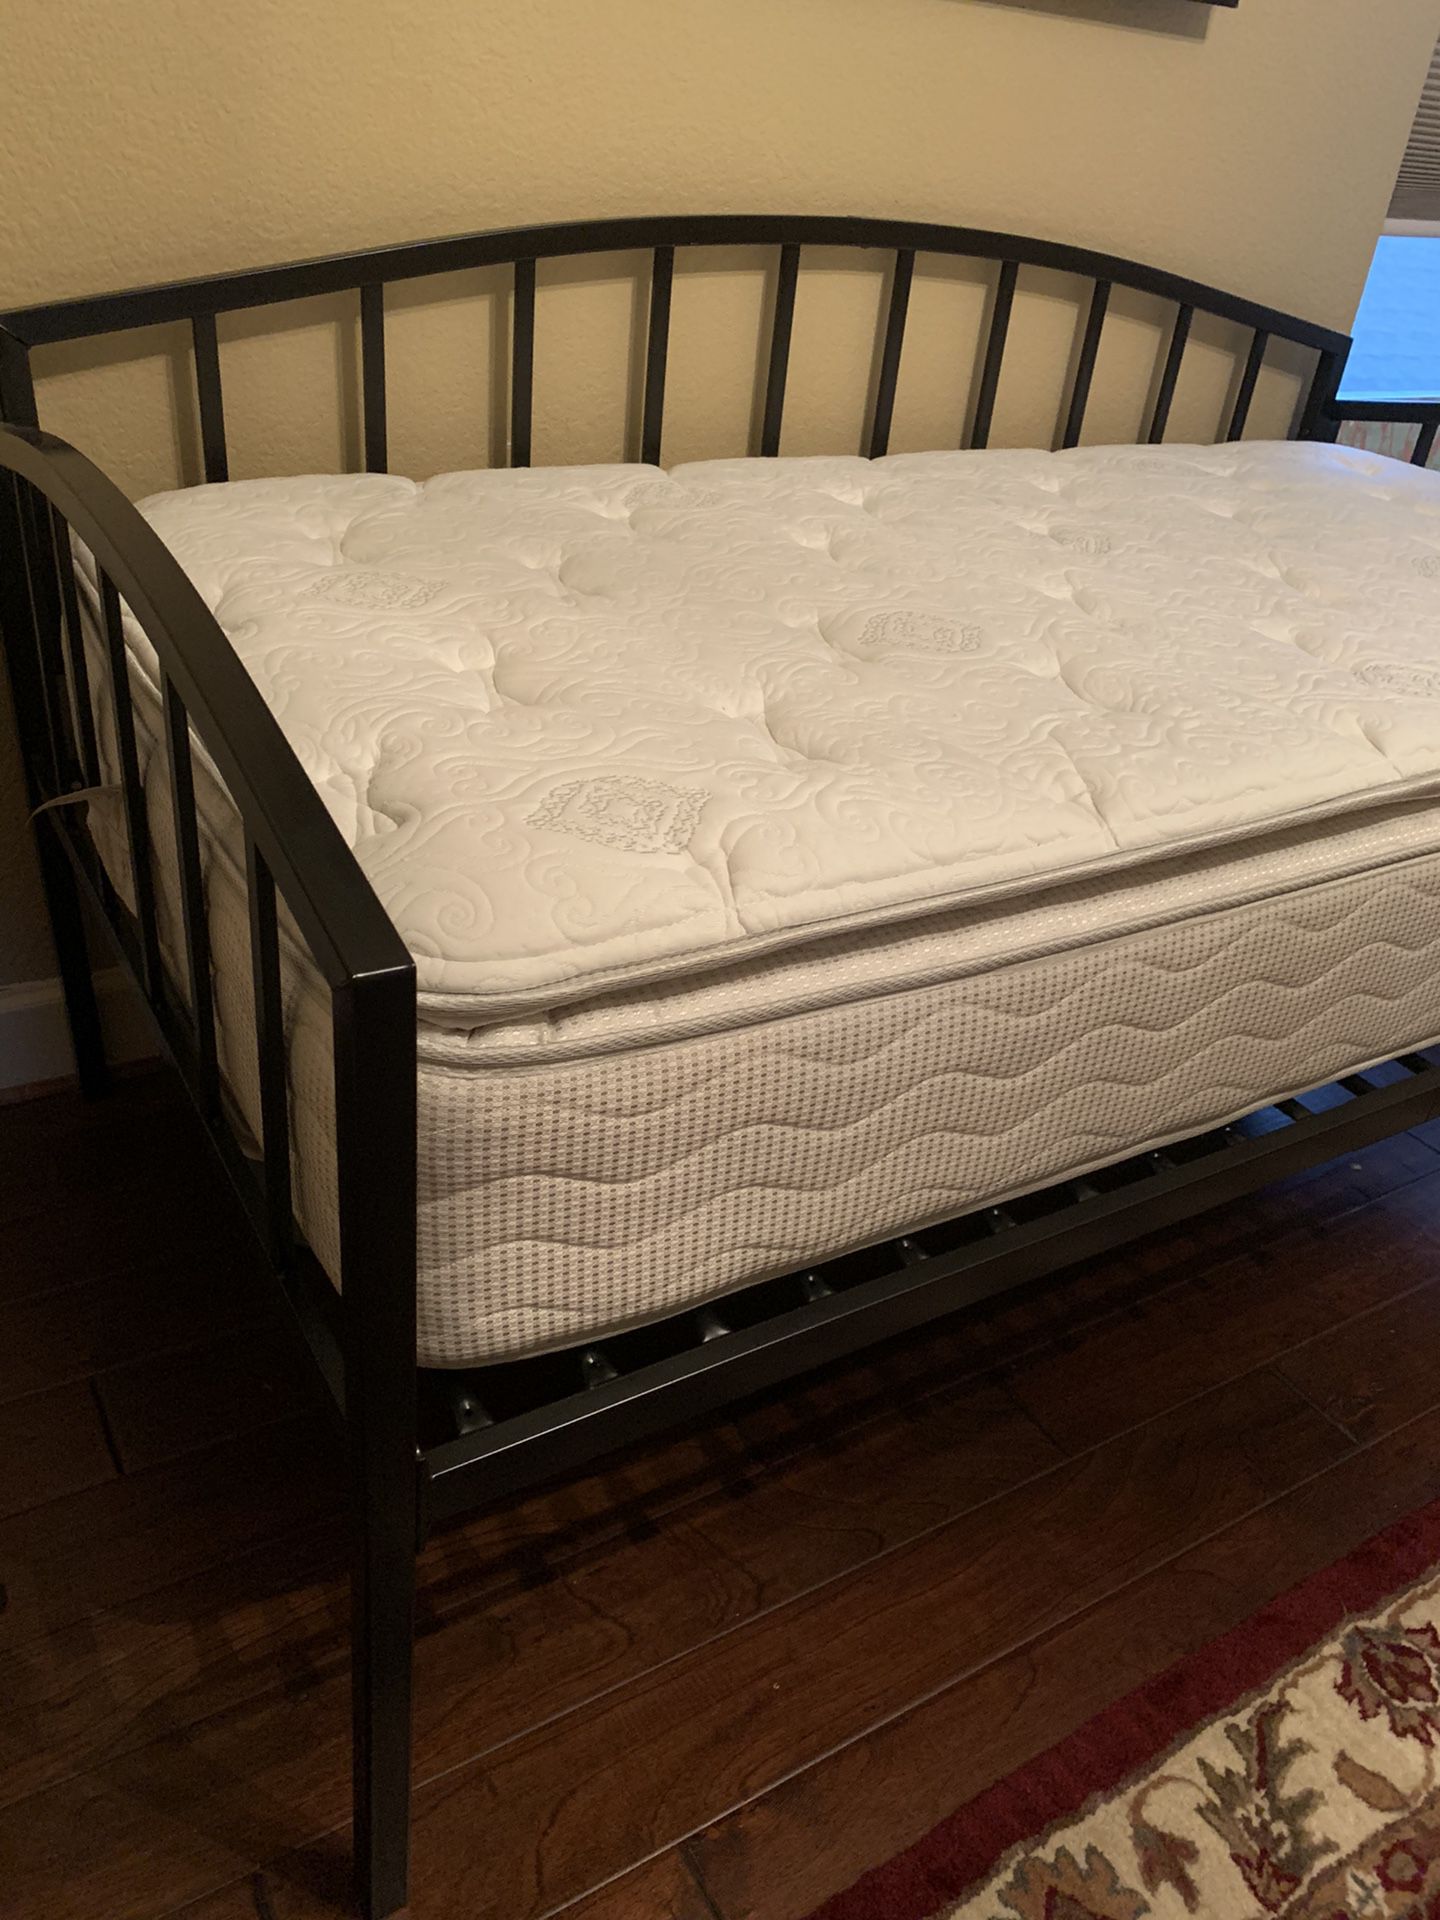 Twin Ben mattress and daybed frame.